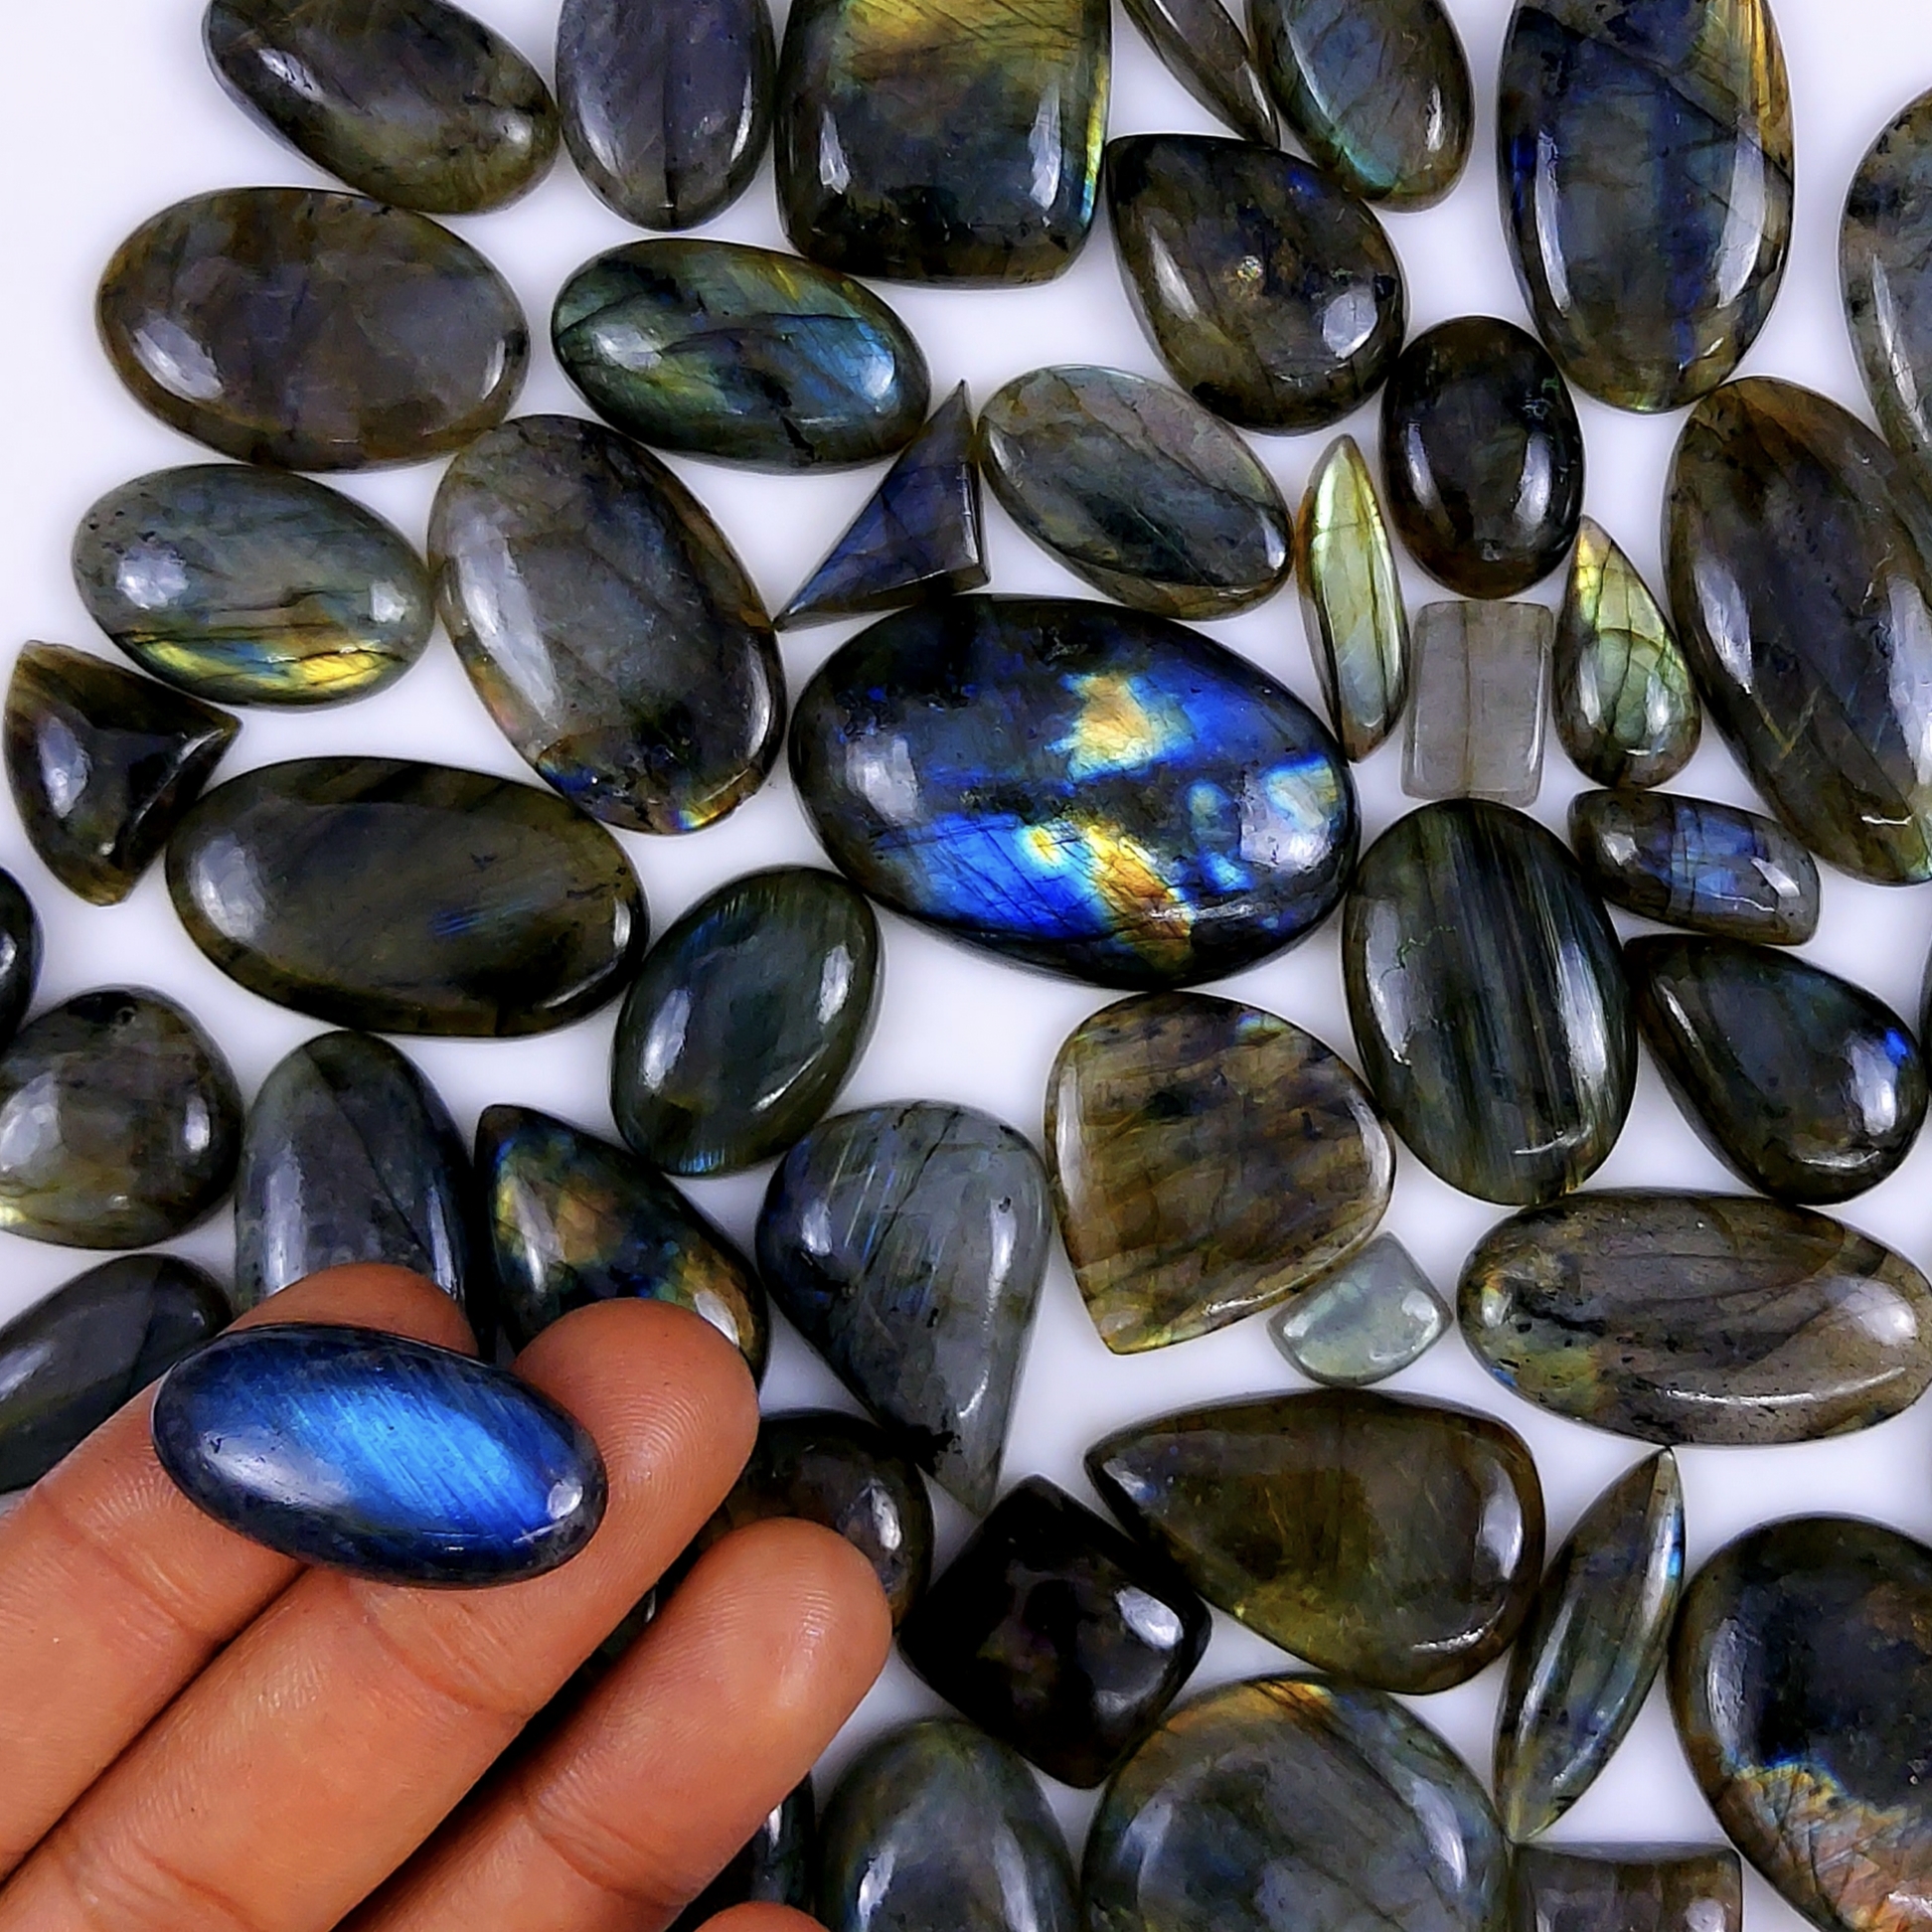 53pc 1706Cts Labradorite Cabochon Multifire Healing Crystal For Jewelry Supplies, Labradorite Necklace Handmade Wire Wrapped Gemstone Pendant 45x30 14x10mm#6286